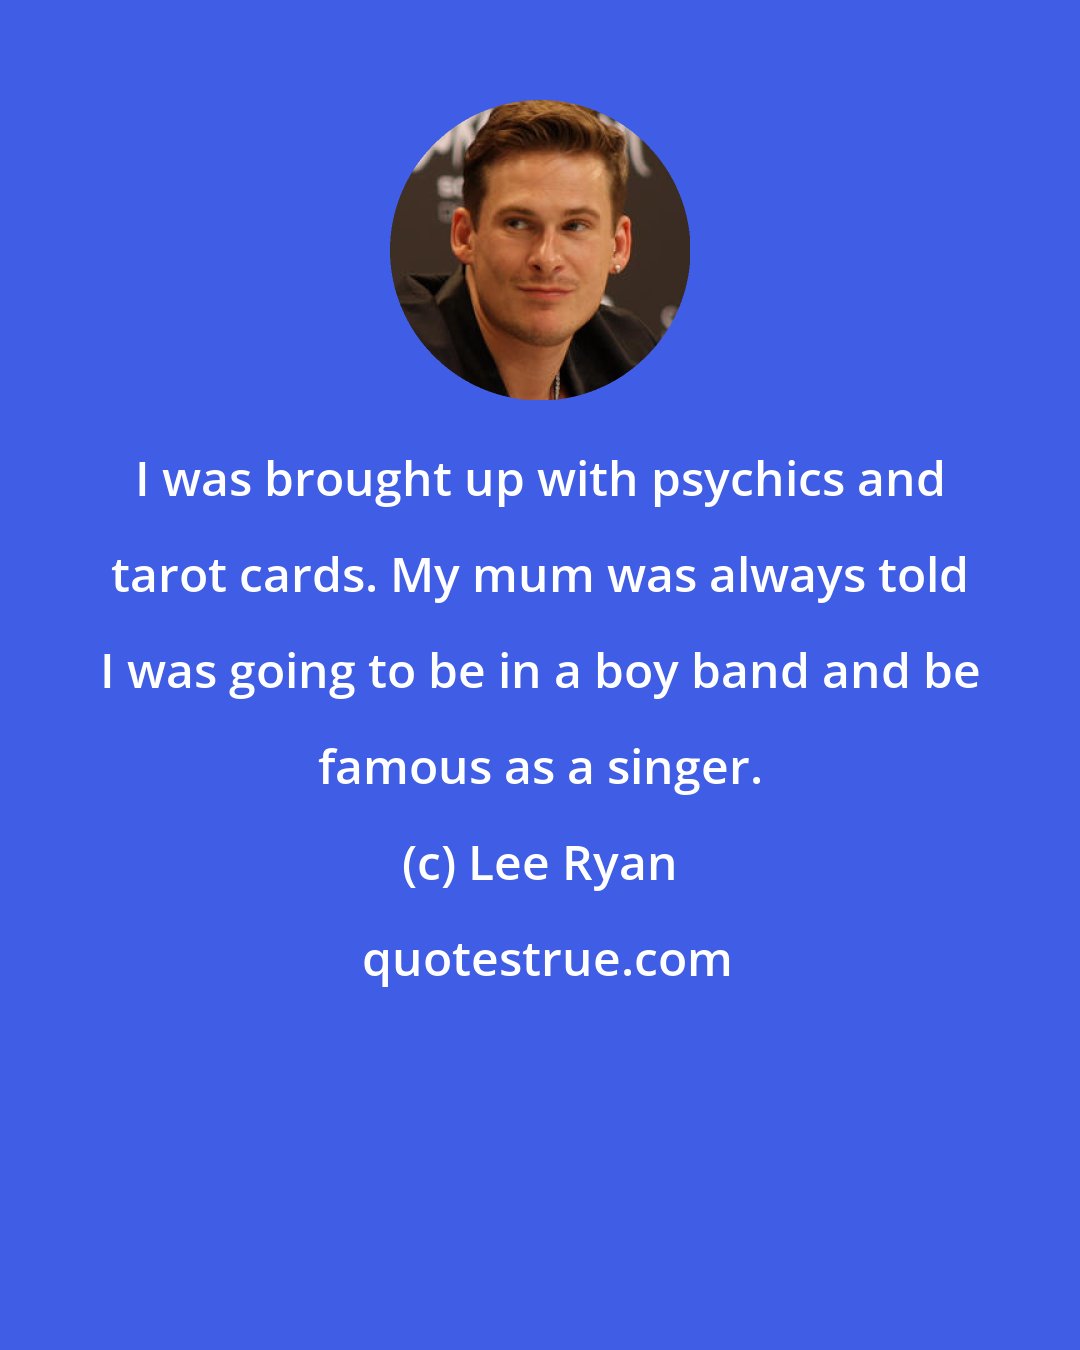 Lee Ryan: I was brought up with psychics and tarot cards. My mum was always told I was going to be in a boy band and be famous as a singer.